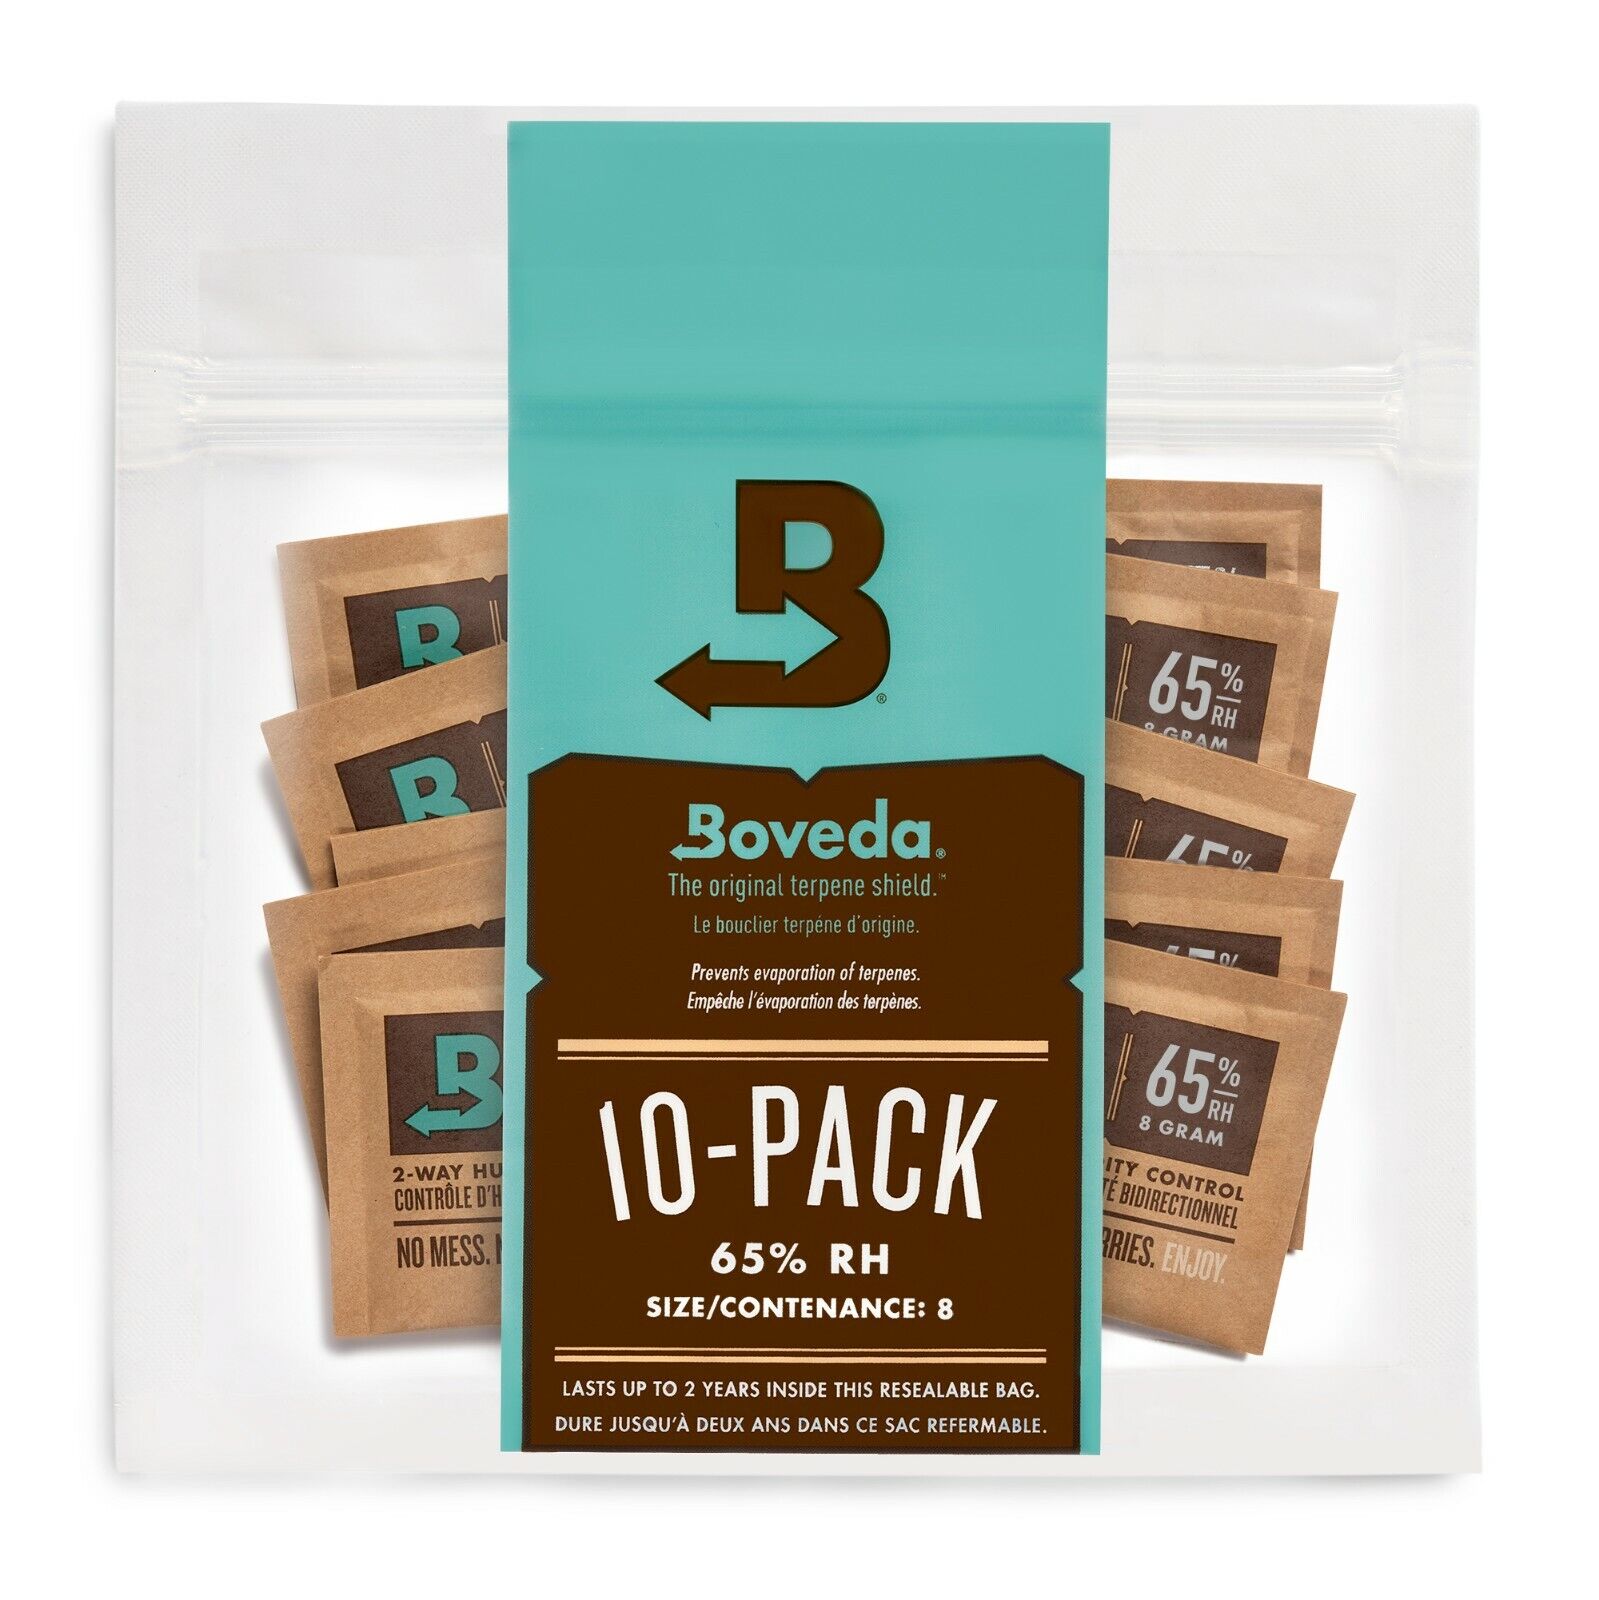 Boveda 65% RH 2-Way Humidity Control - Protects & Restores - Size 8 - 10 Count